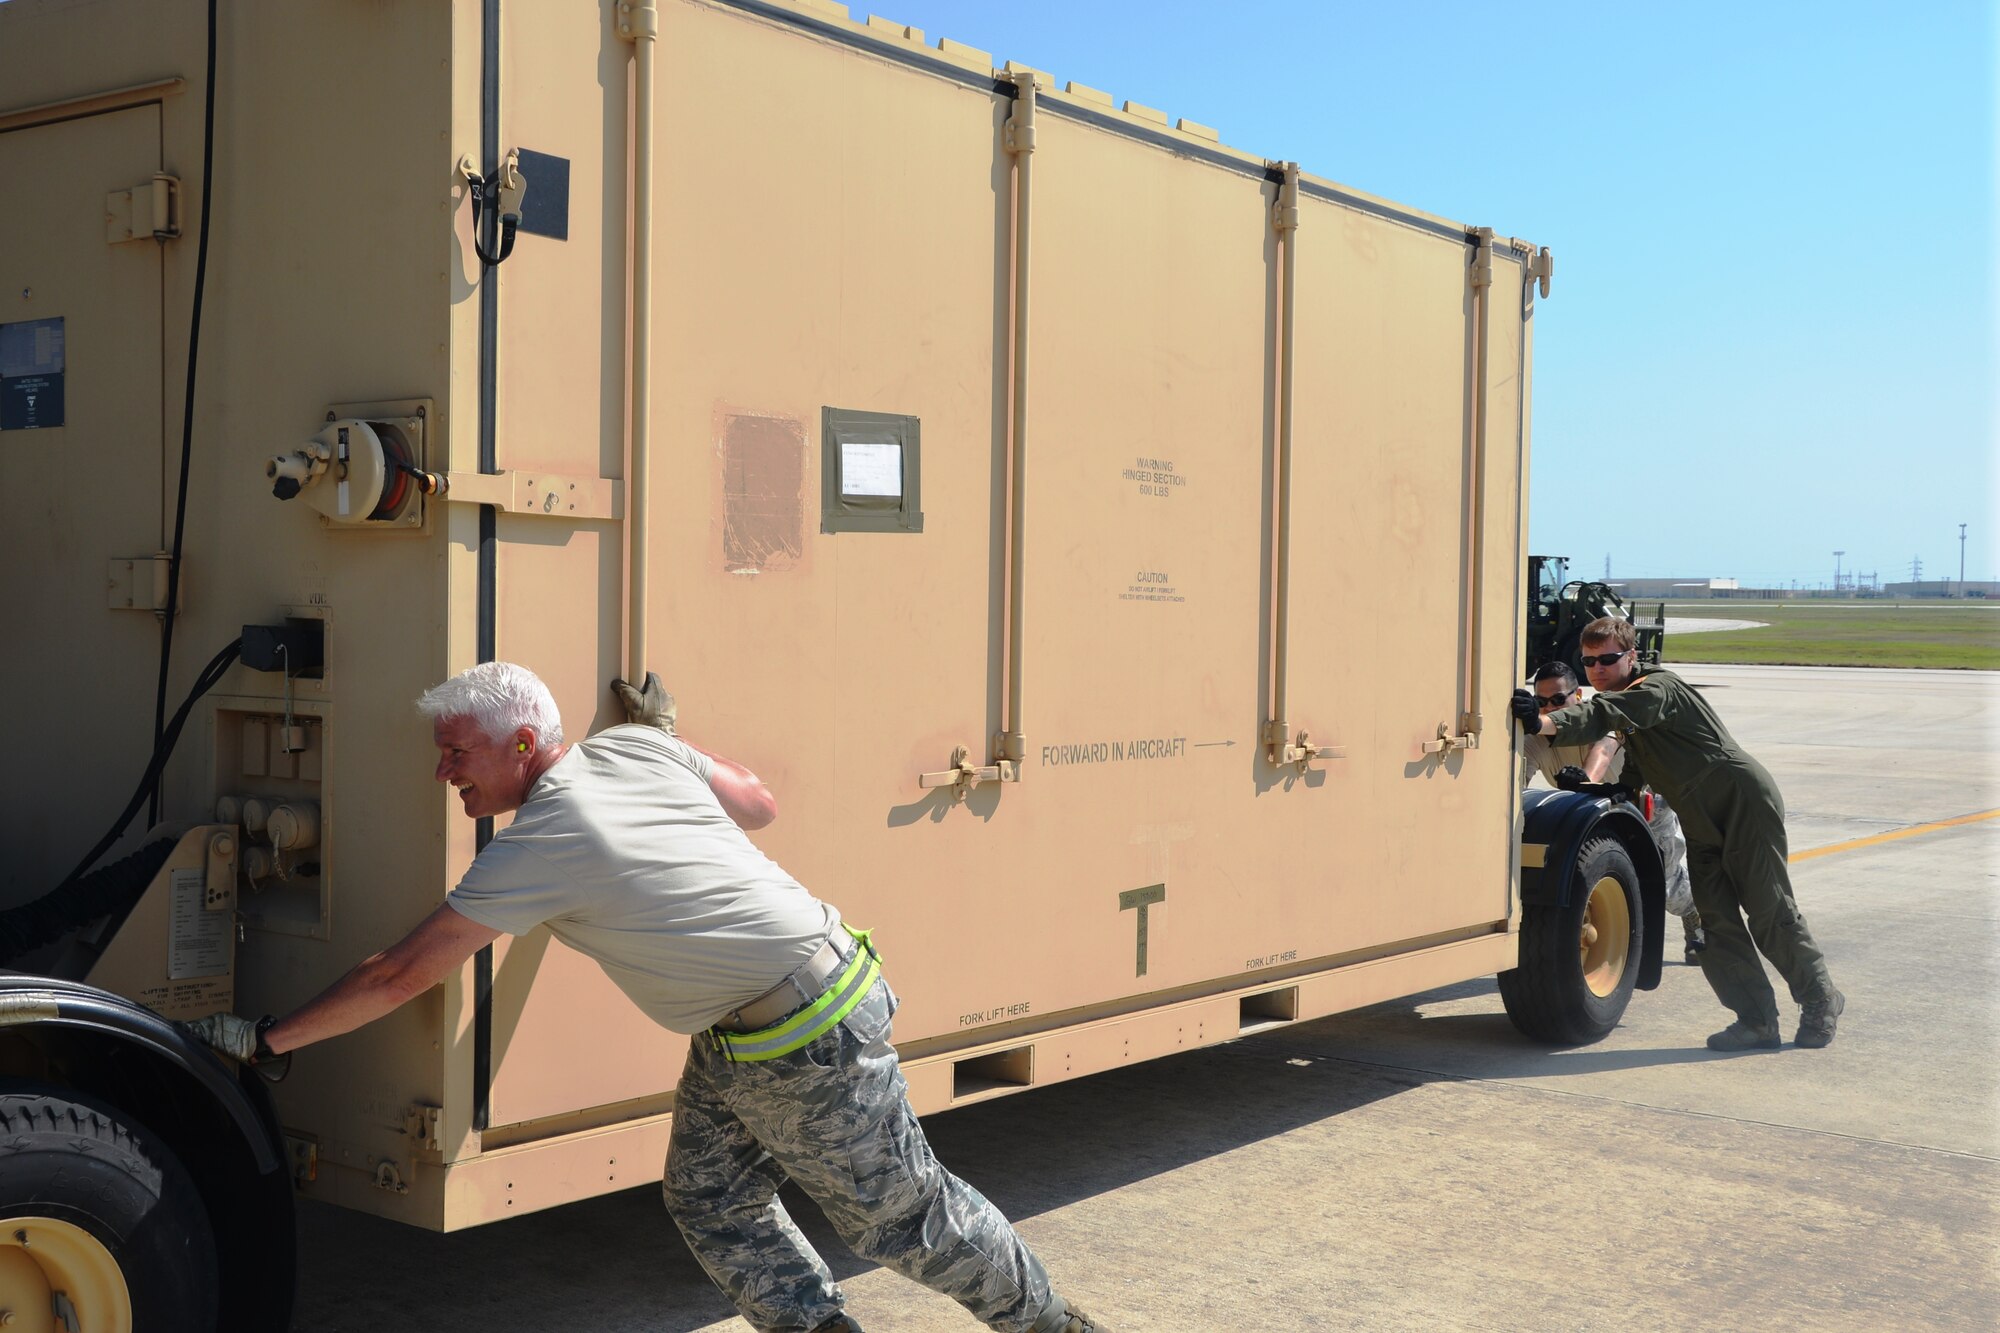 Master Sgt. Charlie Callahan, forefront, communication noncommissioned-officer-in-charge, 433rd Airlift Control Flight, Joint Base San Antonio-Lackland, Texas, positions a Hardside Expandable Light Air-Mobile Shelter in place before loading it on to a C-5A Galaxy aircraft. Twenty-three members from the 433rd Airlift Wing traveled to Naval Air Station, North Island, Calif. 23 April, 2014 to participate in the Air Force Reserve Command’s Patriot Hook Exercise at North Island, Calif. (U.S. Air Force photo/Senior Master Sgt. Minnie Jones)
